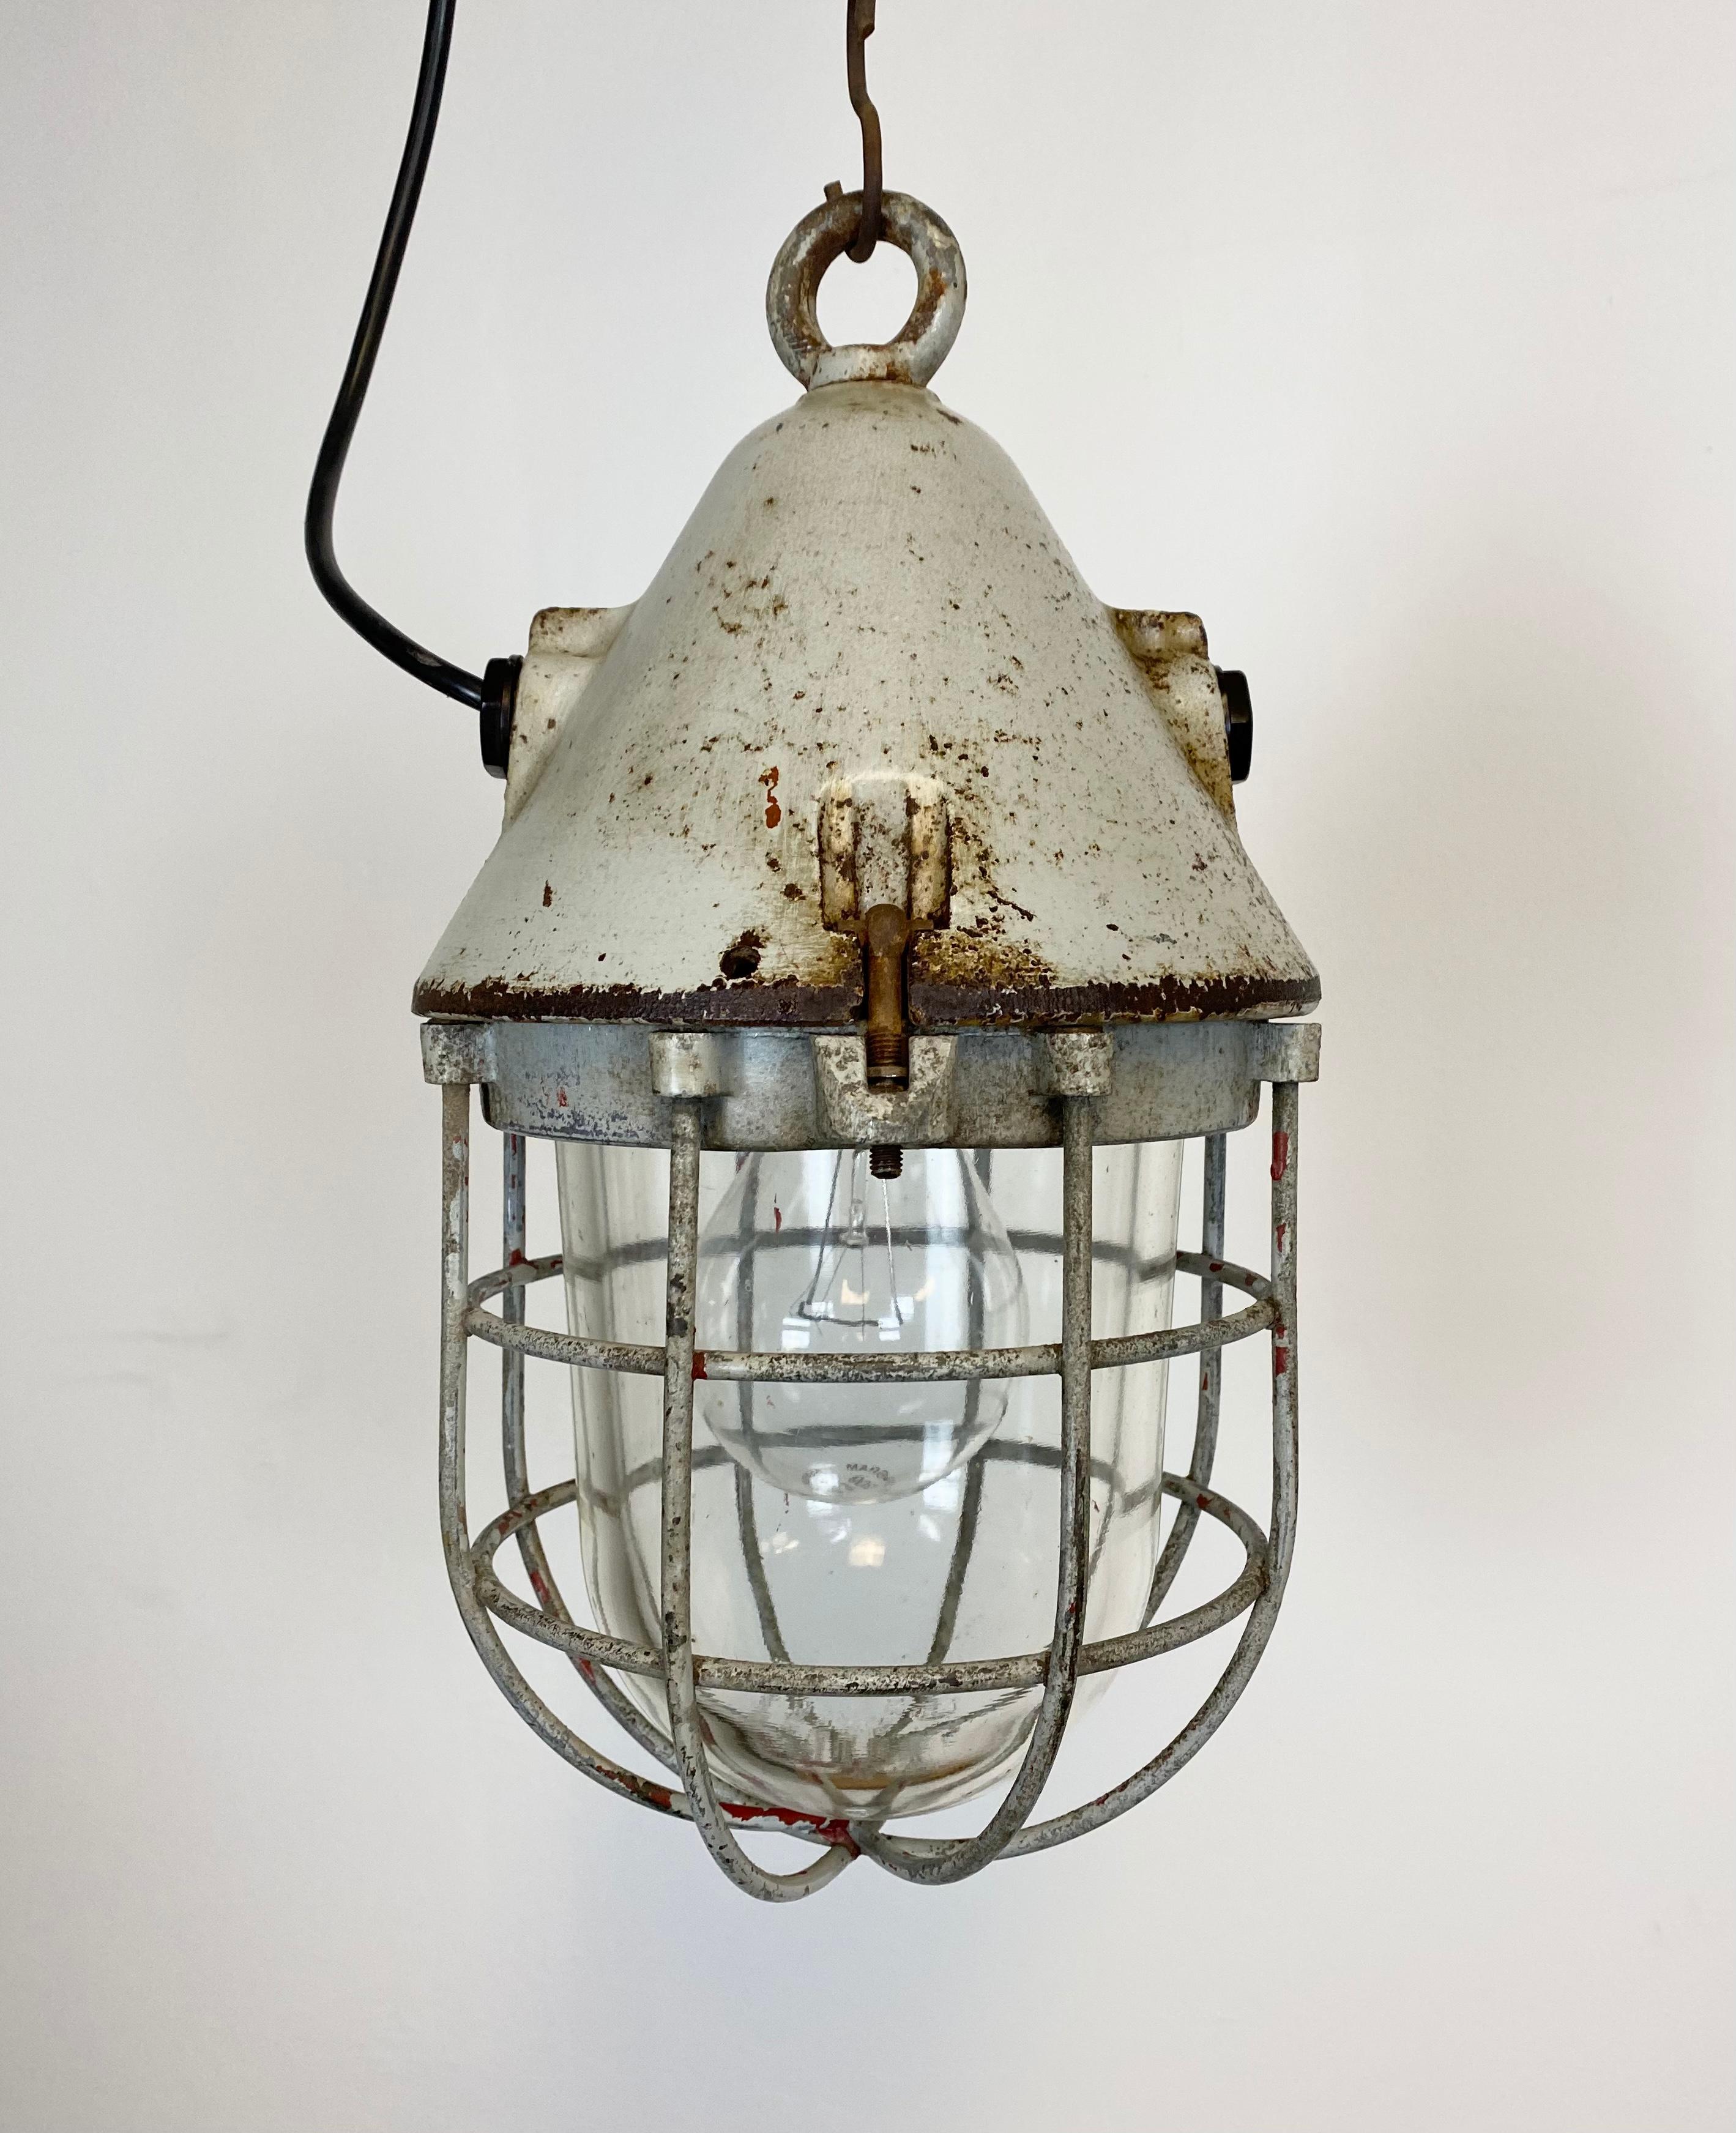 - Industrial bunker lamp made by EOW in East Germany during the 1960s
- Used in power plants and mines
- Made of cast iron and explosion-proof glass
- Porcelain socket requires E 27 lightbulbs
- Weighs 6 kg.